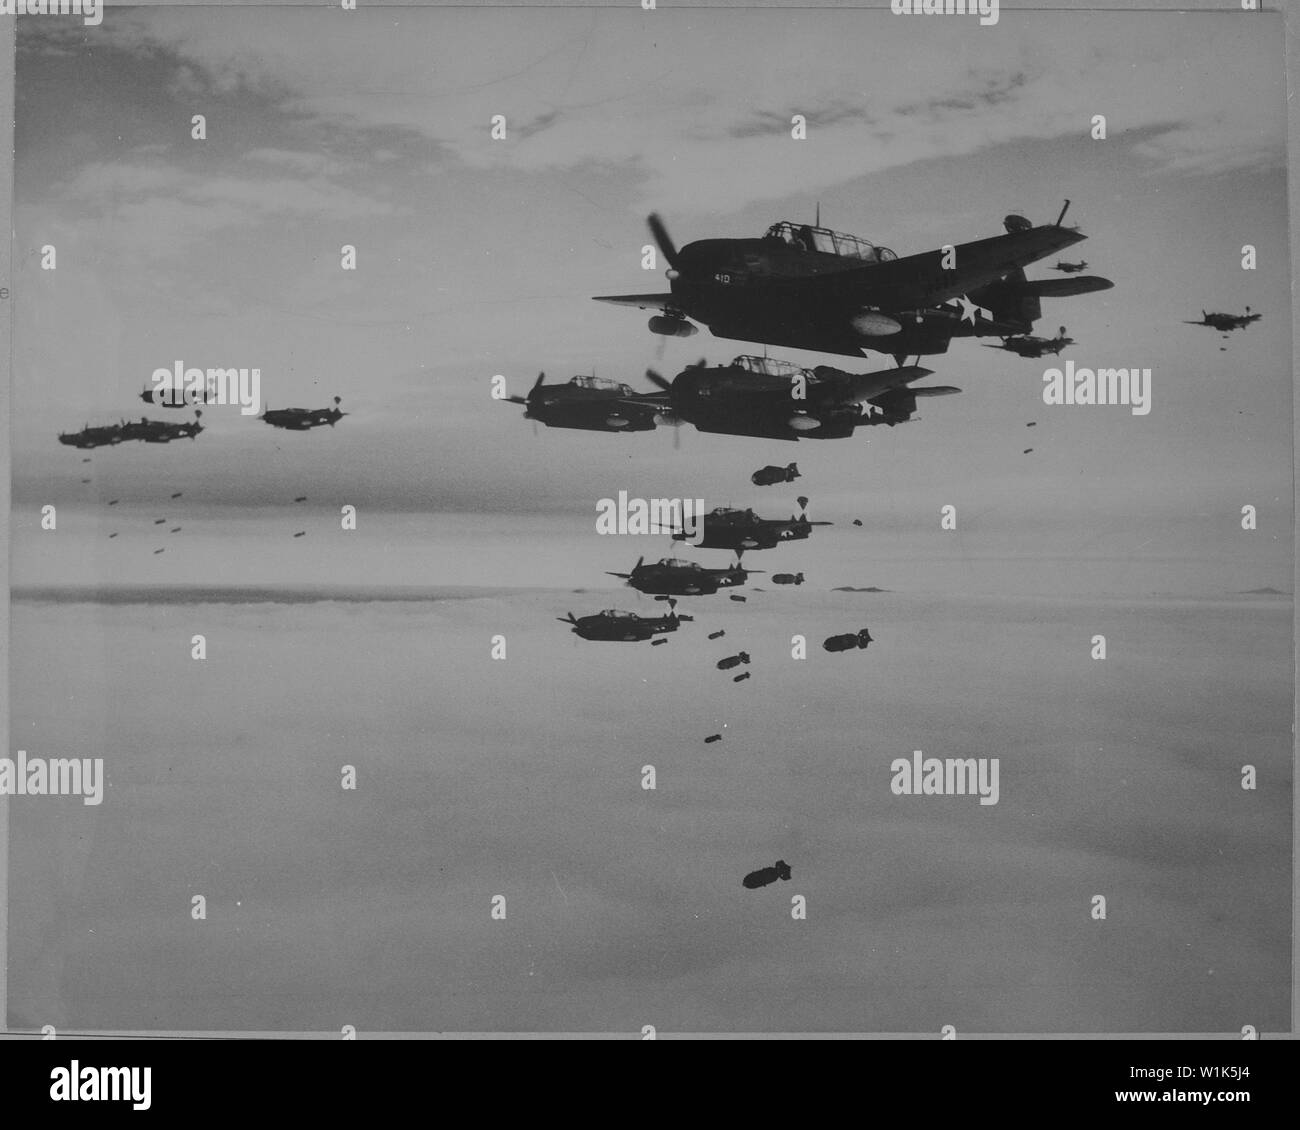 USS ESSEX based TBMs and SB2Cs dropping bombs on Hakodate, Japan.; General notes:  Use War and Conflict Number 1238 when ordering a reproduction or requesting information about this image. Stock Photo